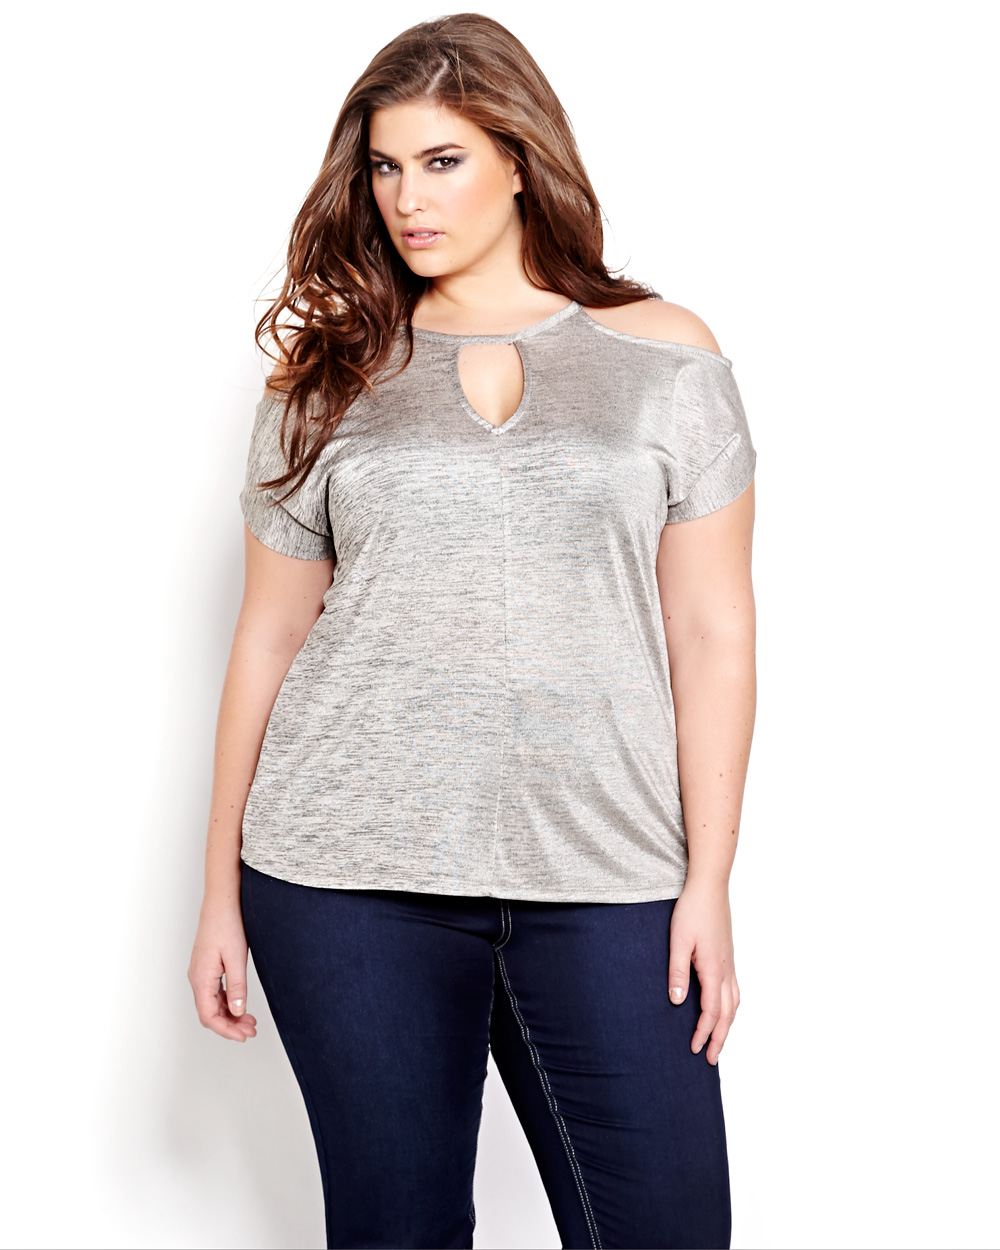 Addition Elle Canada Offers: Save 50% Off Select T-Shirts & Tanks ...